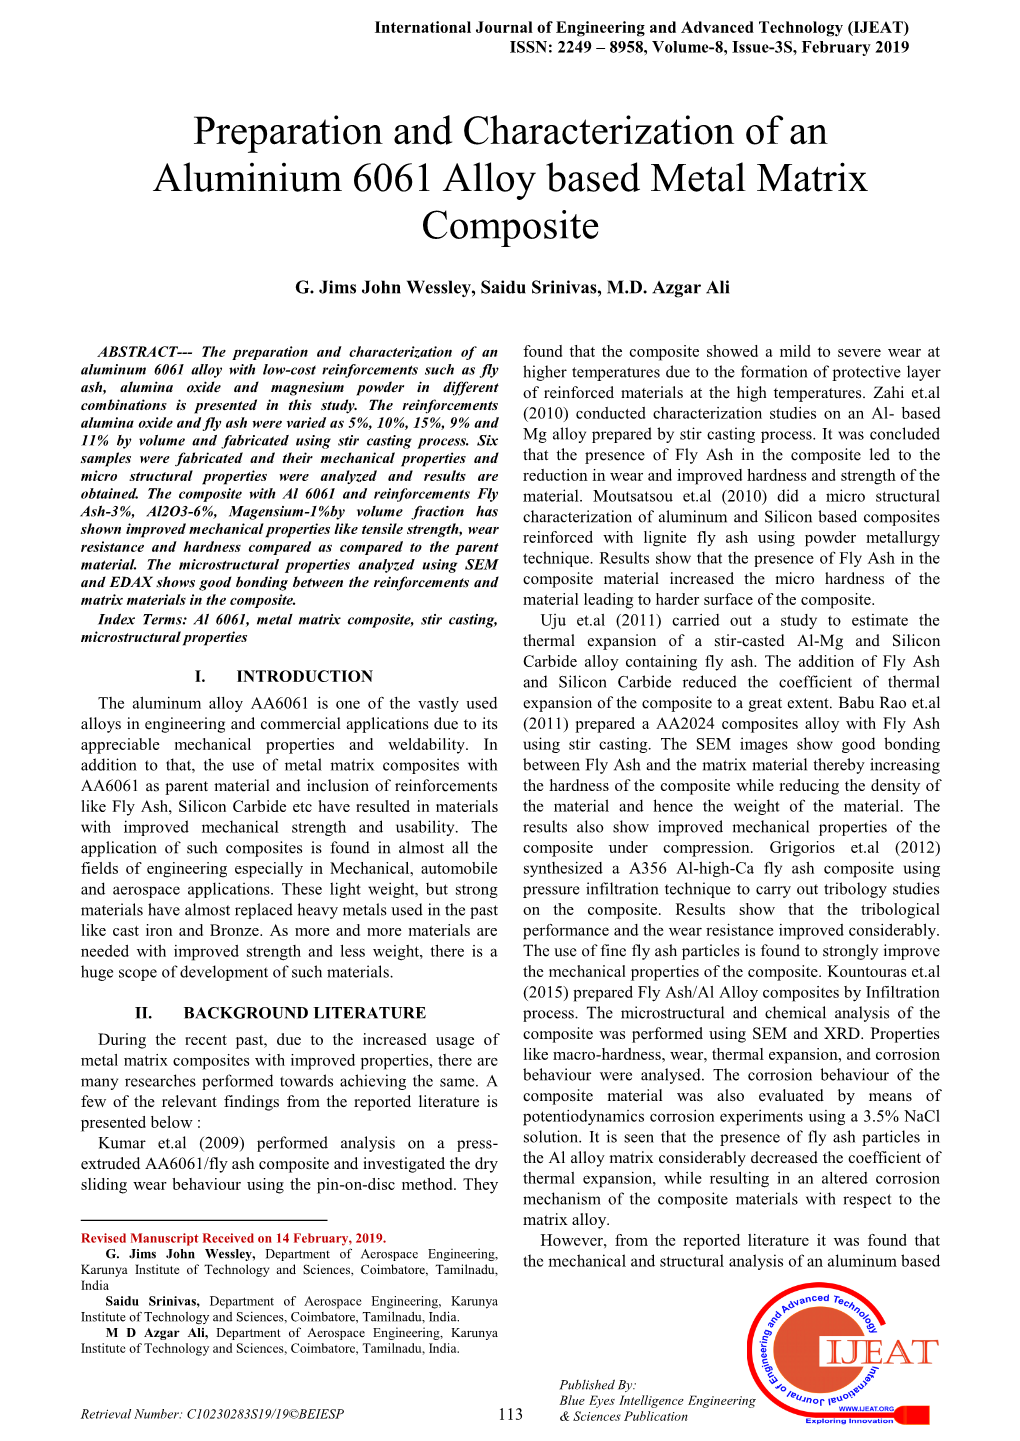 Preparation and Characterization of an Aluminium 6061 Alloy Based Metal Matrix Composite